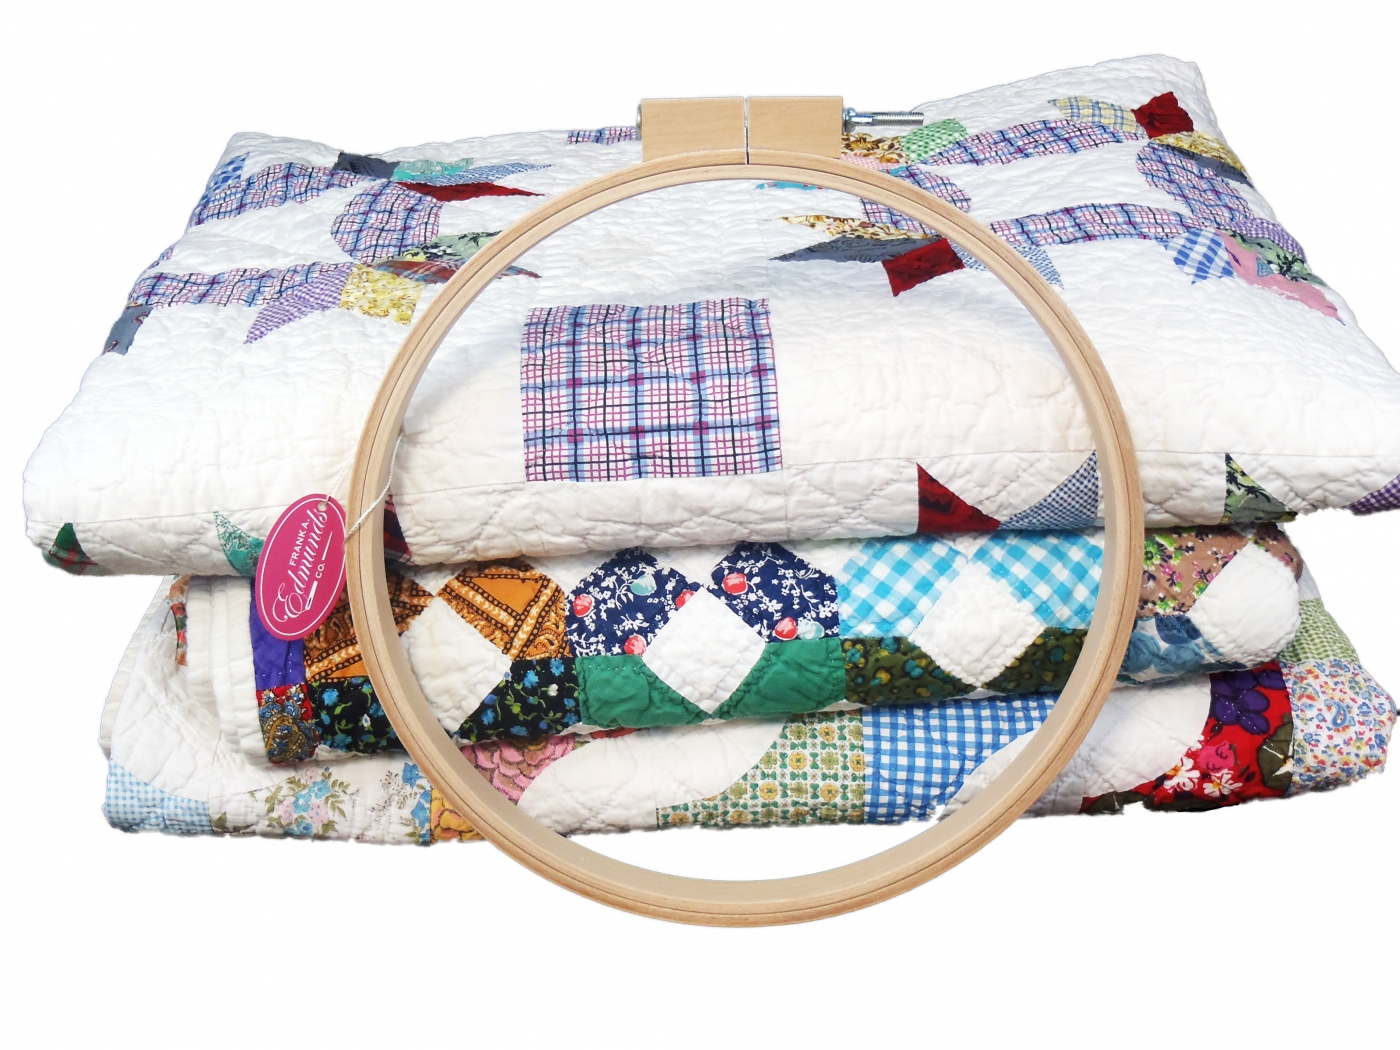 F.A. Edmund's American Legacy Quilt Frame Kit Sold Separately 